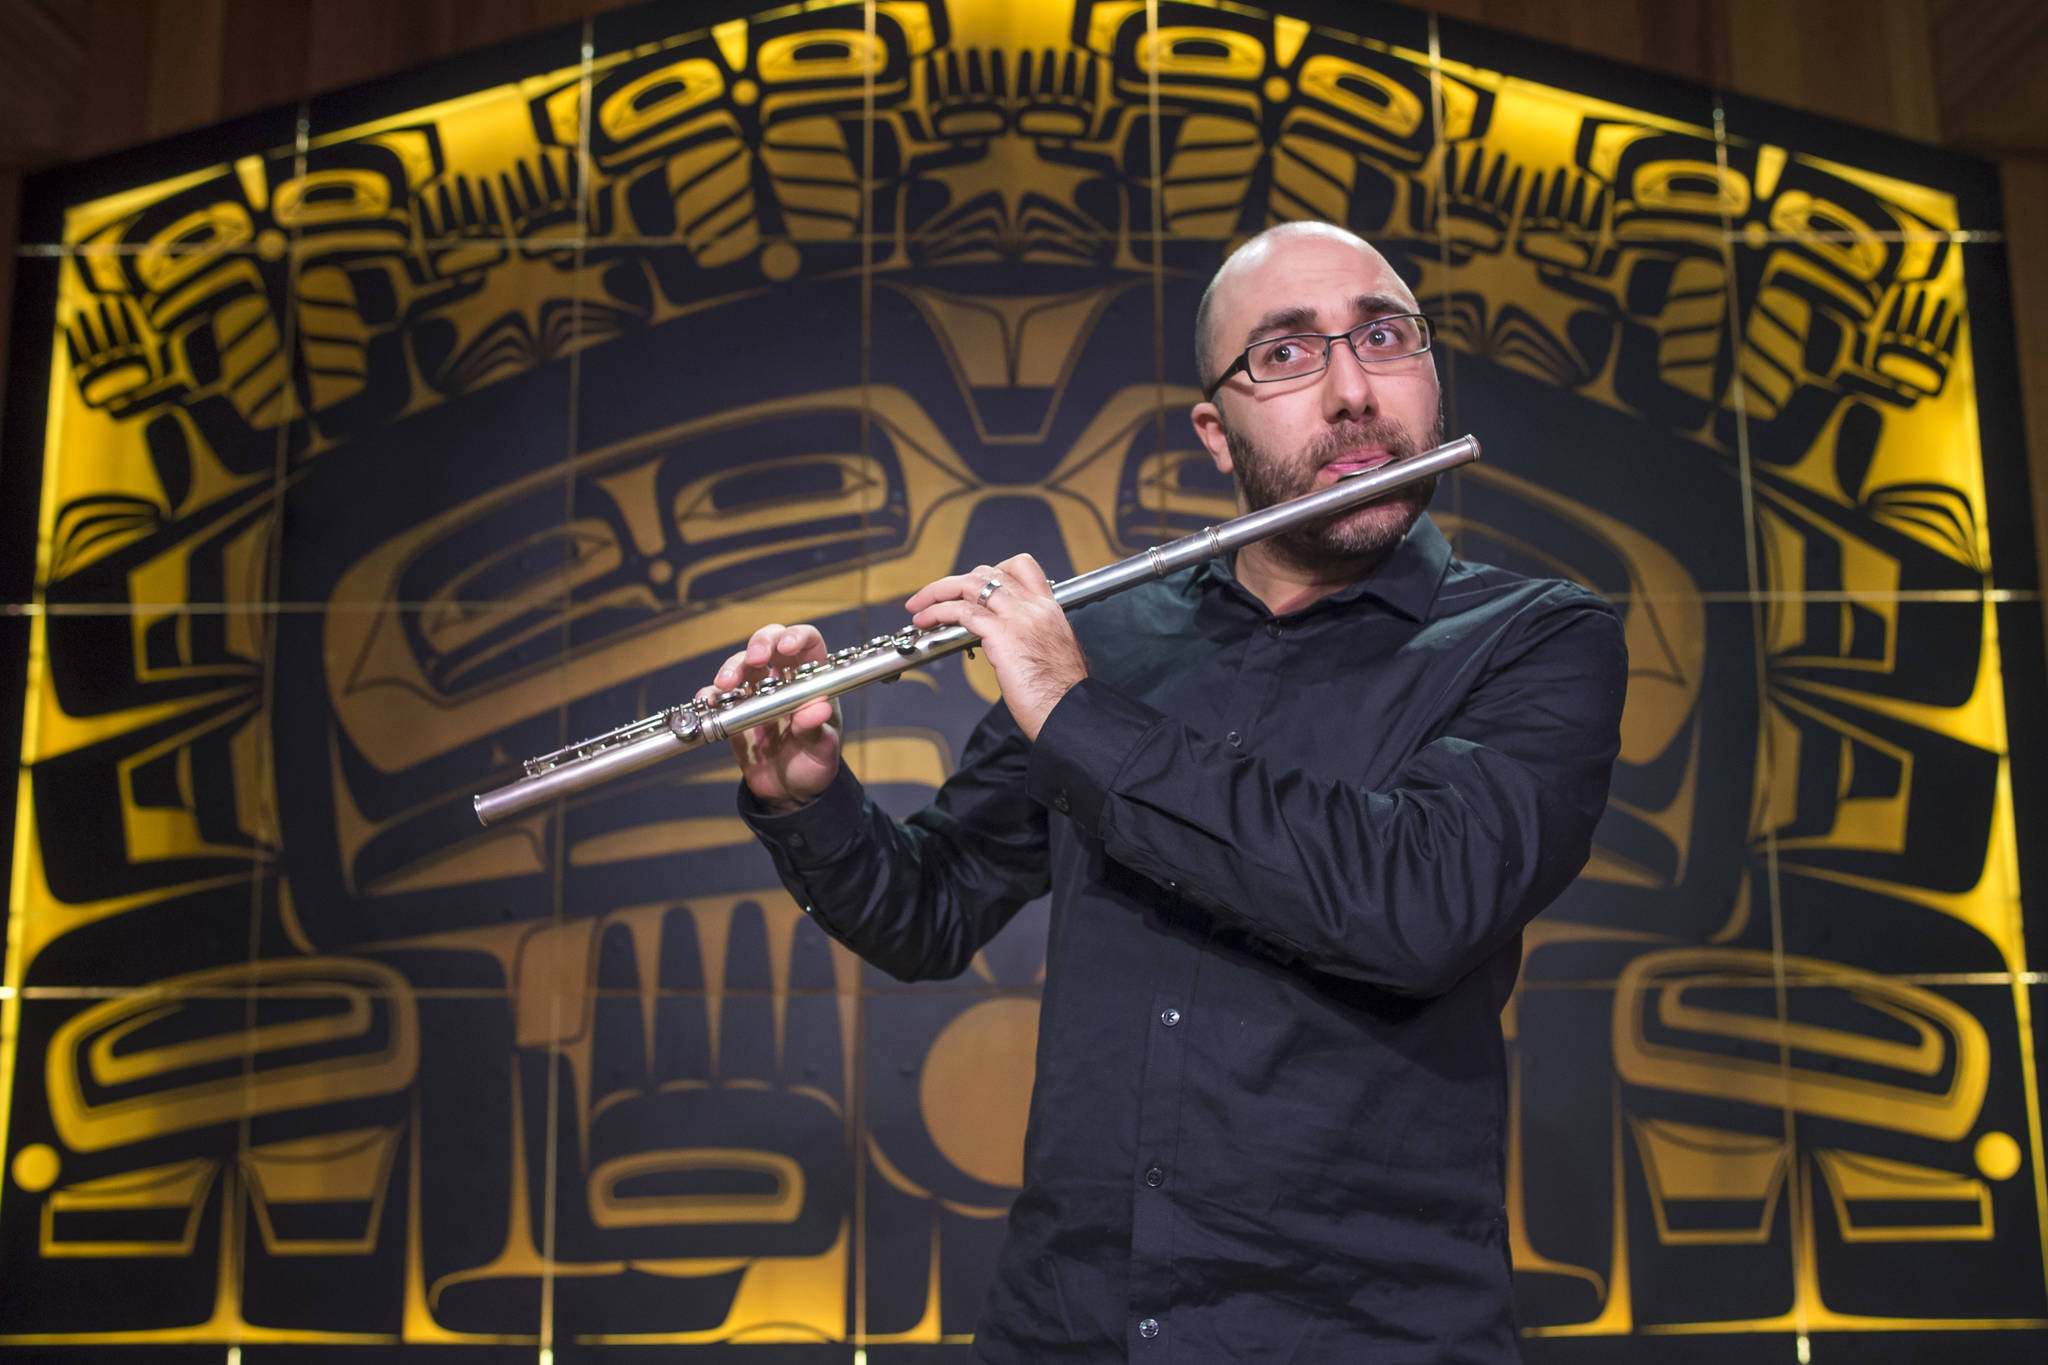 Armenian-American flautist Tigran Arakelyan, the Music Director of the Northwest Mahler Festival in Seattle and the Port Townsend Orchestra, performs a sound check in the Shuká Hít (Ancestors’ House) at the Walter Soboleff Center on Wednesday, Jan. 16, 2019. He will be conducting Juneau Symphony’s Russian Romantic concerts. (Michael Penn | Juneau Empire)